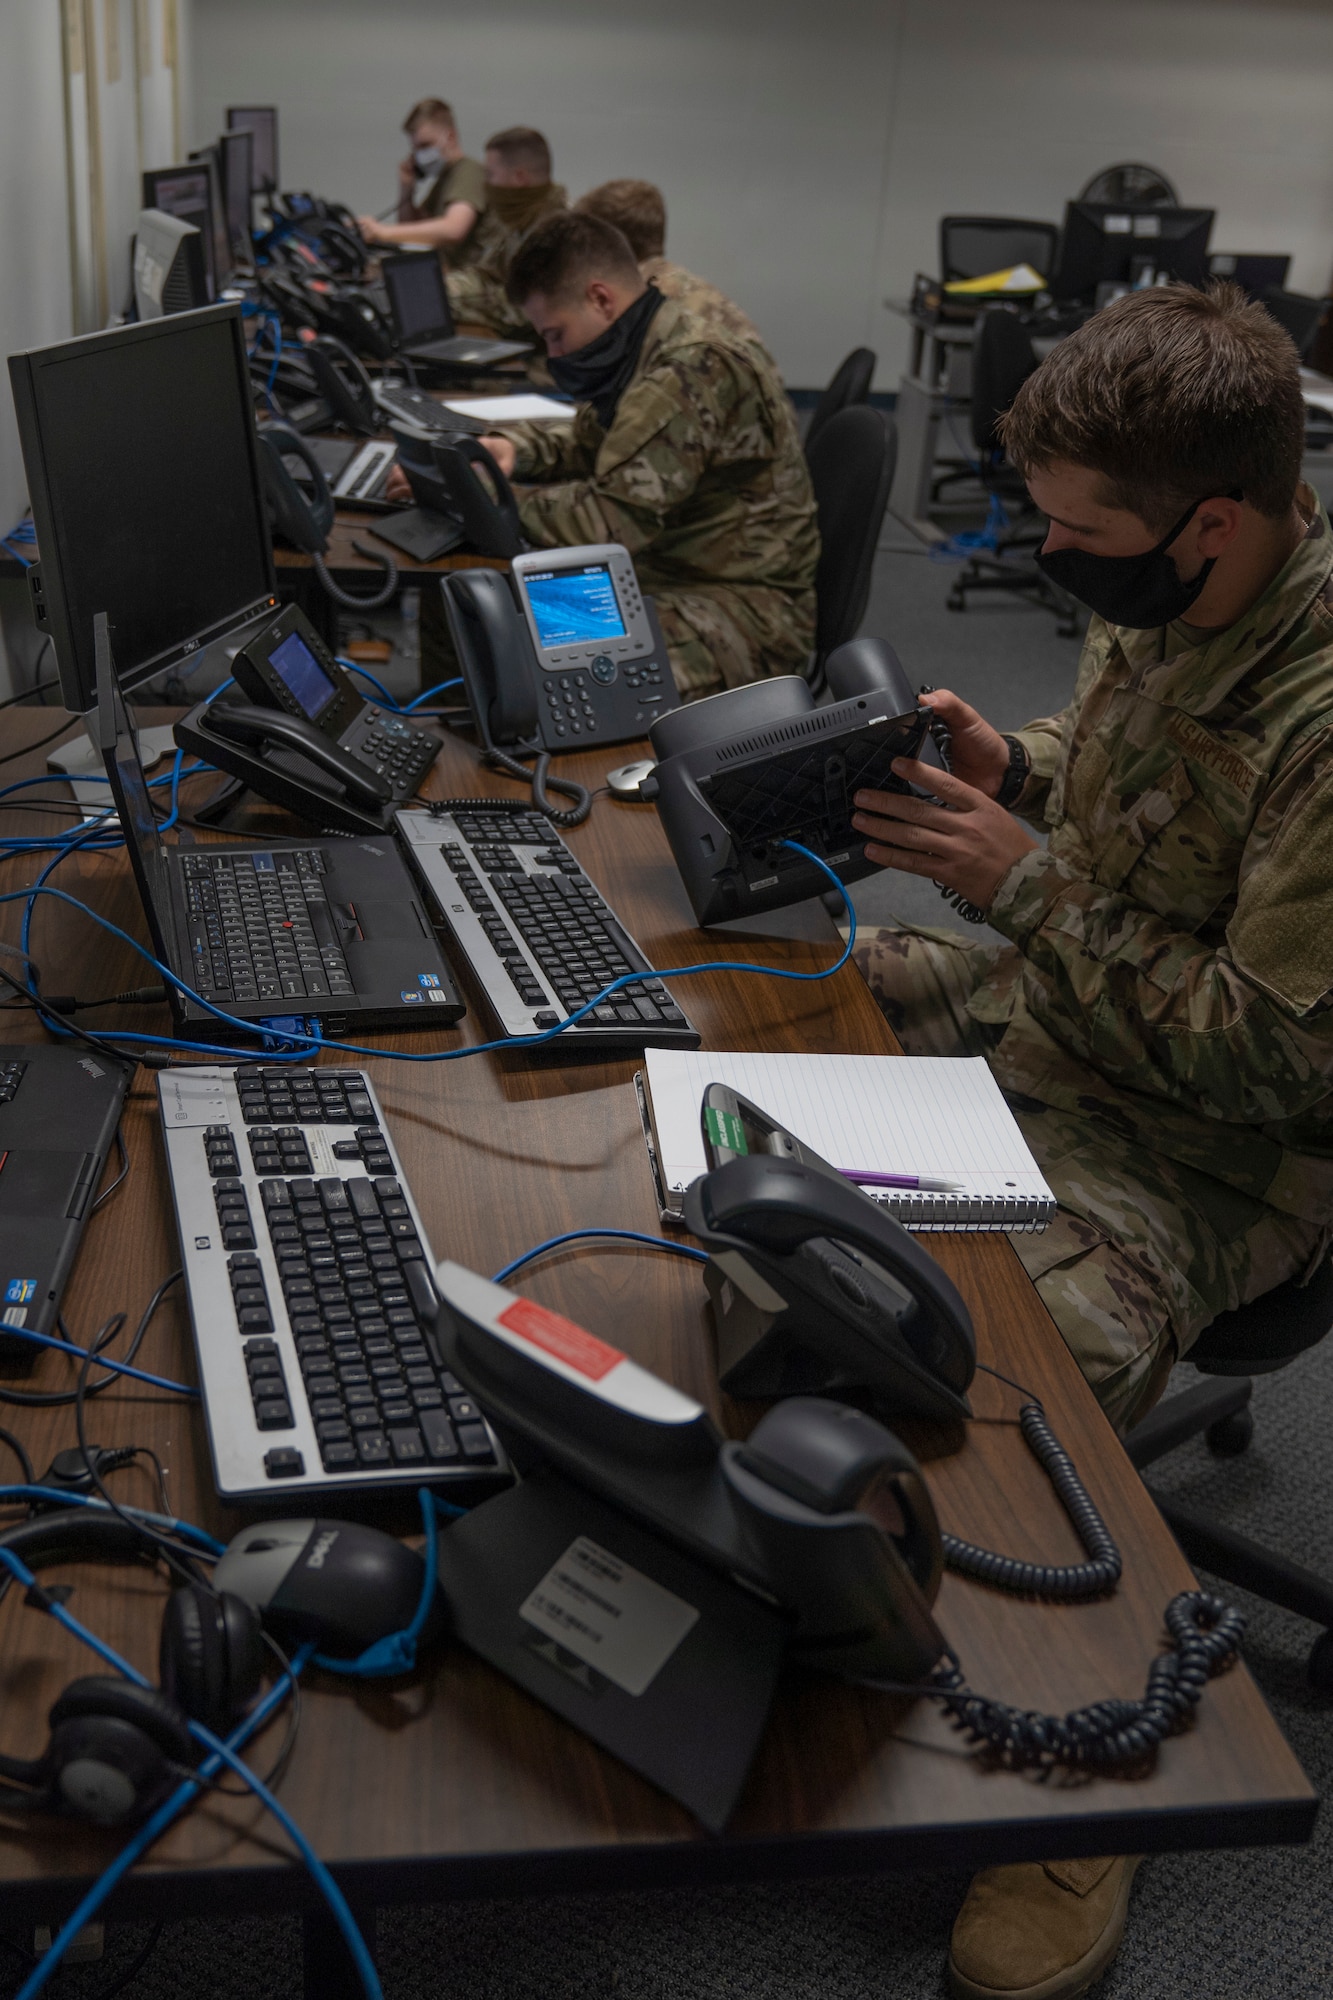 U.S. Air Force Airman Thatcher LaPrise, 338th Training Squadron student, practices connecting a phone to a network in Bryan Hall at Keesler Air Force Base, Mississippi, on Jan. 26, 2021. The 338th TRS has been working towards a modular curriculum, which enables students to receive the training tailored to their future assignment, for approximately five years. (U.S. Air Force photo by Airman 1st Class Kimberly L. Mueller)